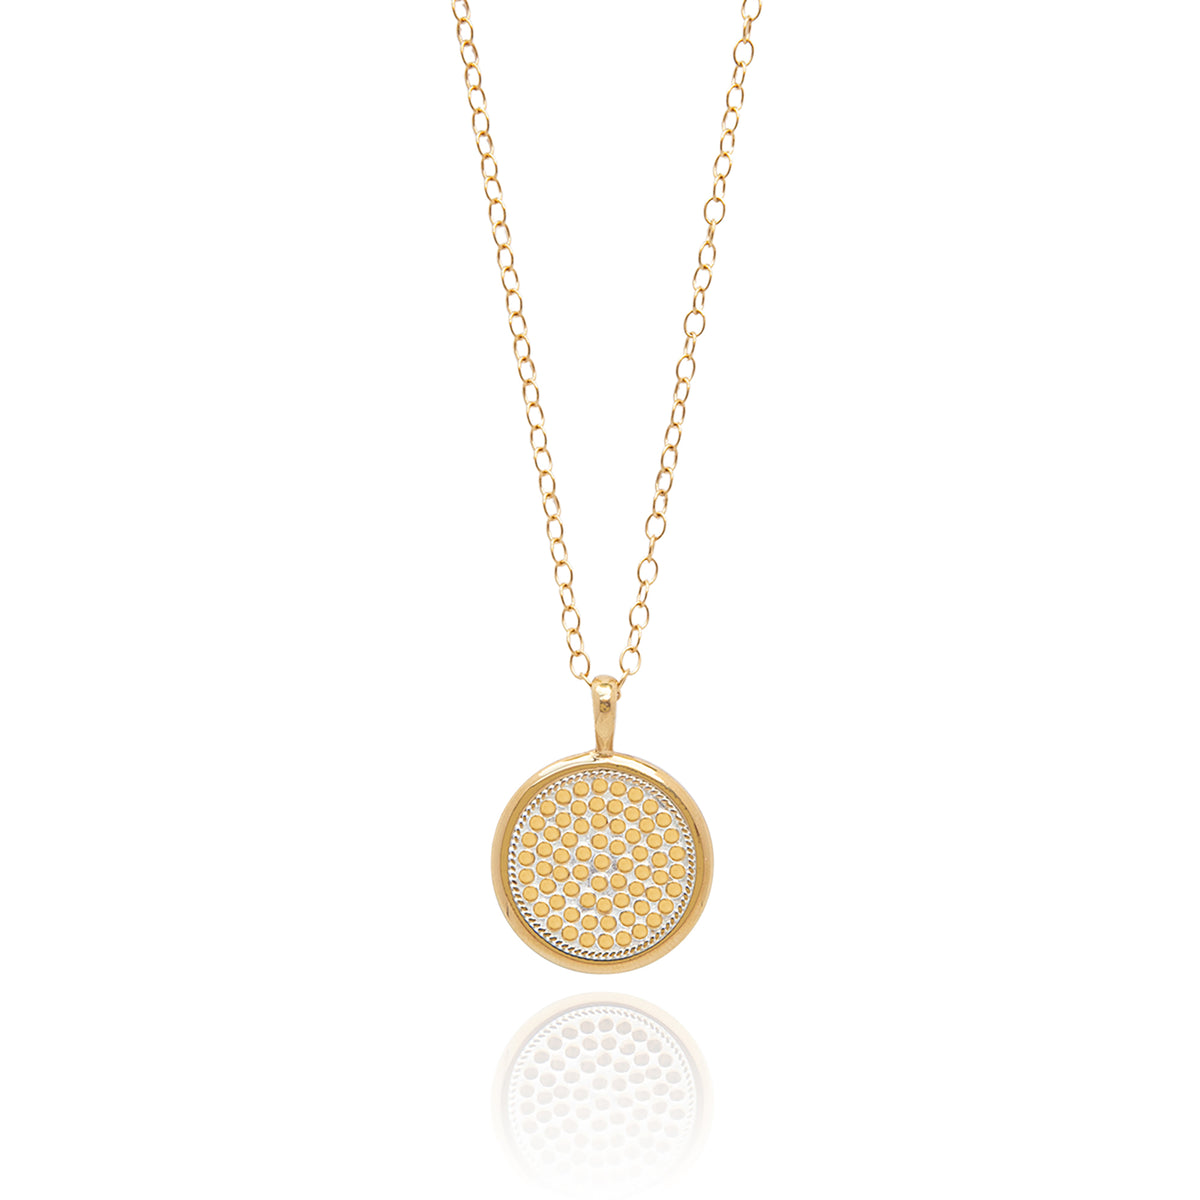 Gold pendant necklace with gold loop chain and circle pendant with delicate gold dot details